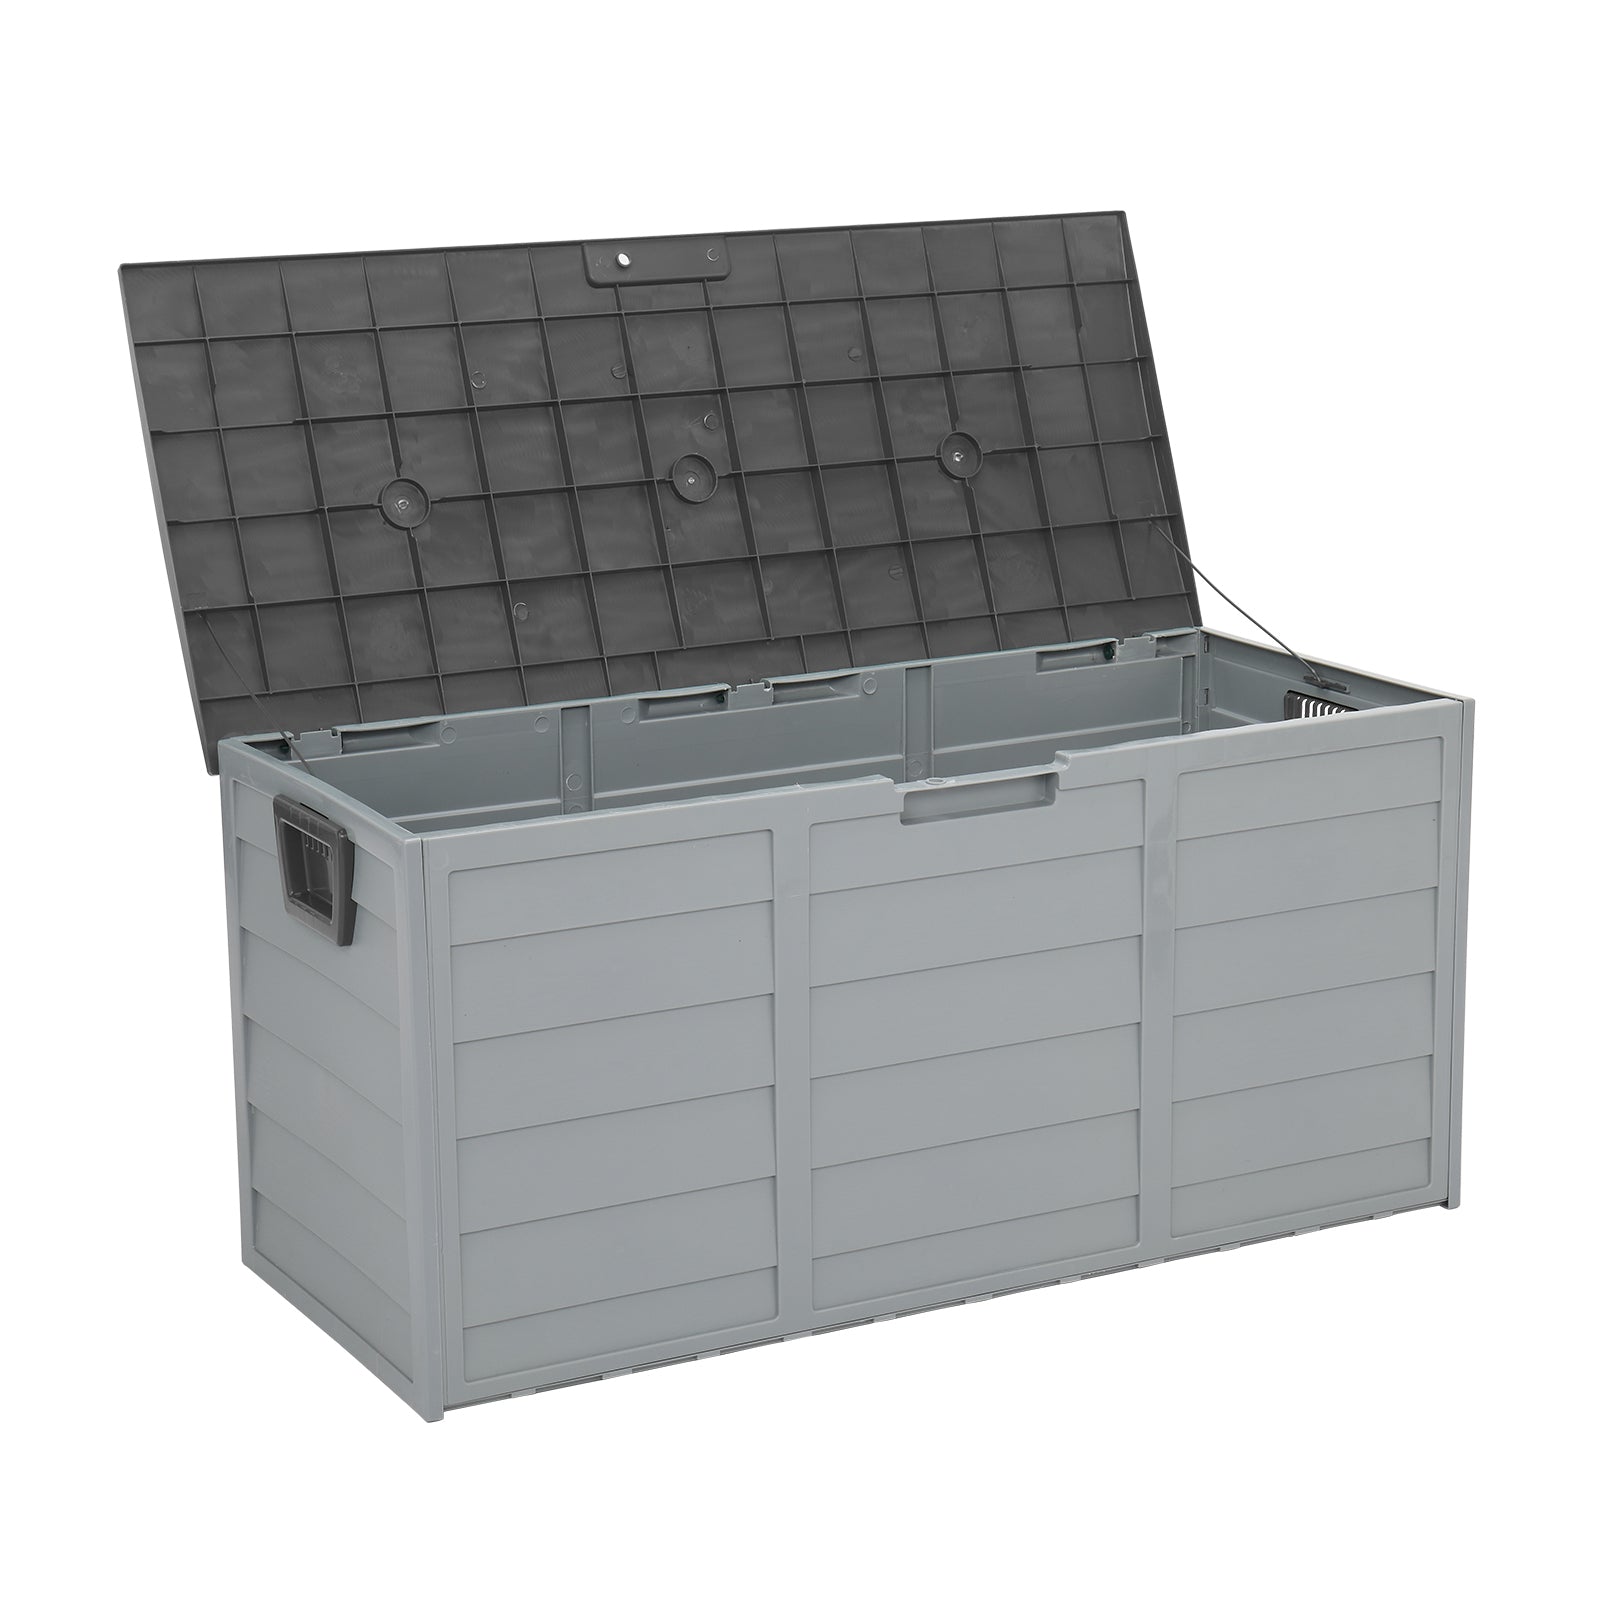 ZNTS 75gal 260L Outdoor Garden Plastic Storage Deck Box Chest Tools Cushions Toys Lockable Seat 10663967